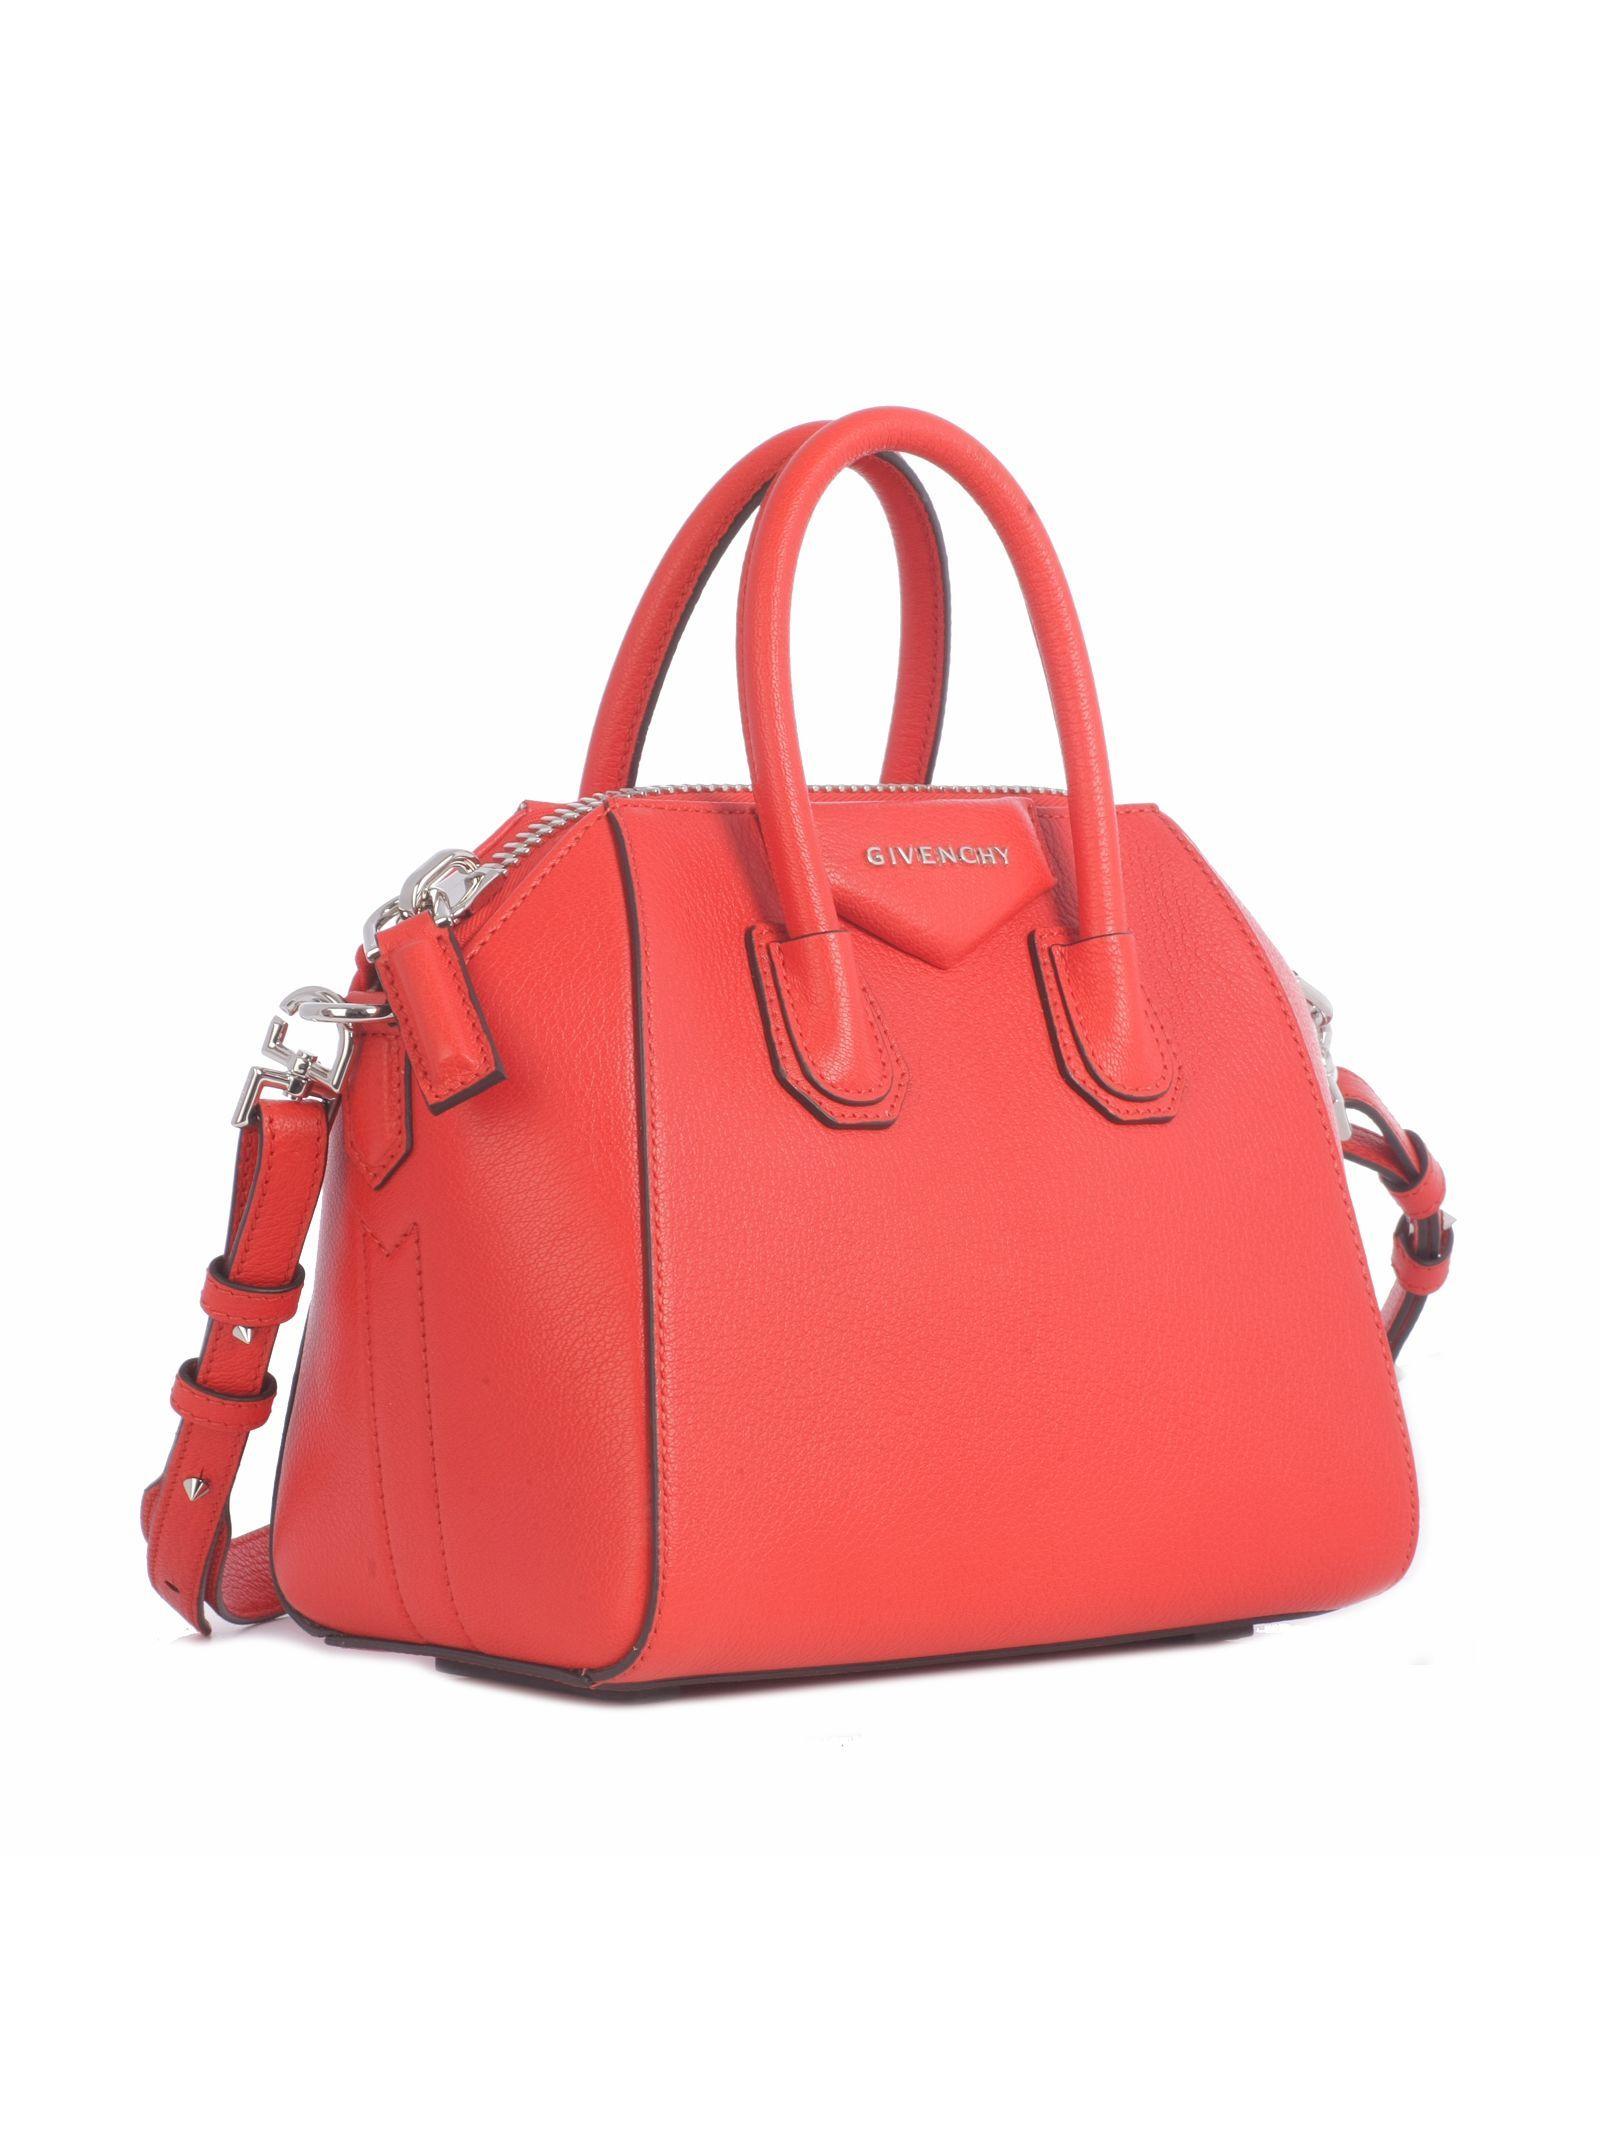 Silver On a Red Hand Logo - Givenchy Antigona Mini With Silver Insert And Silver Logo On The ...